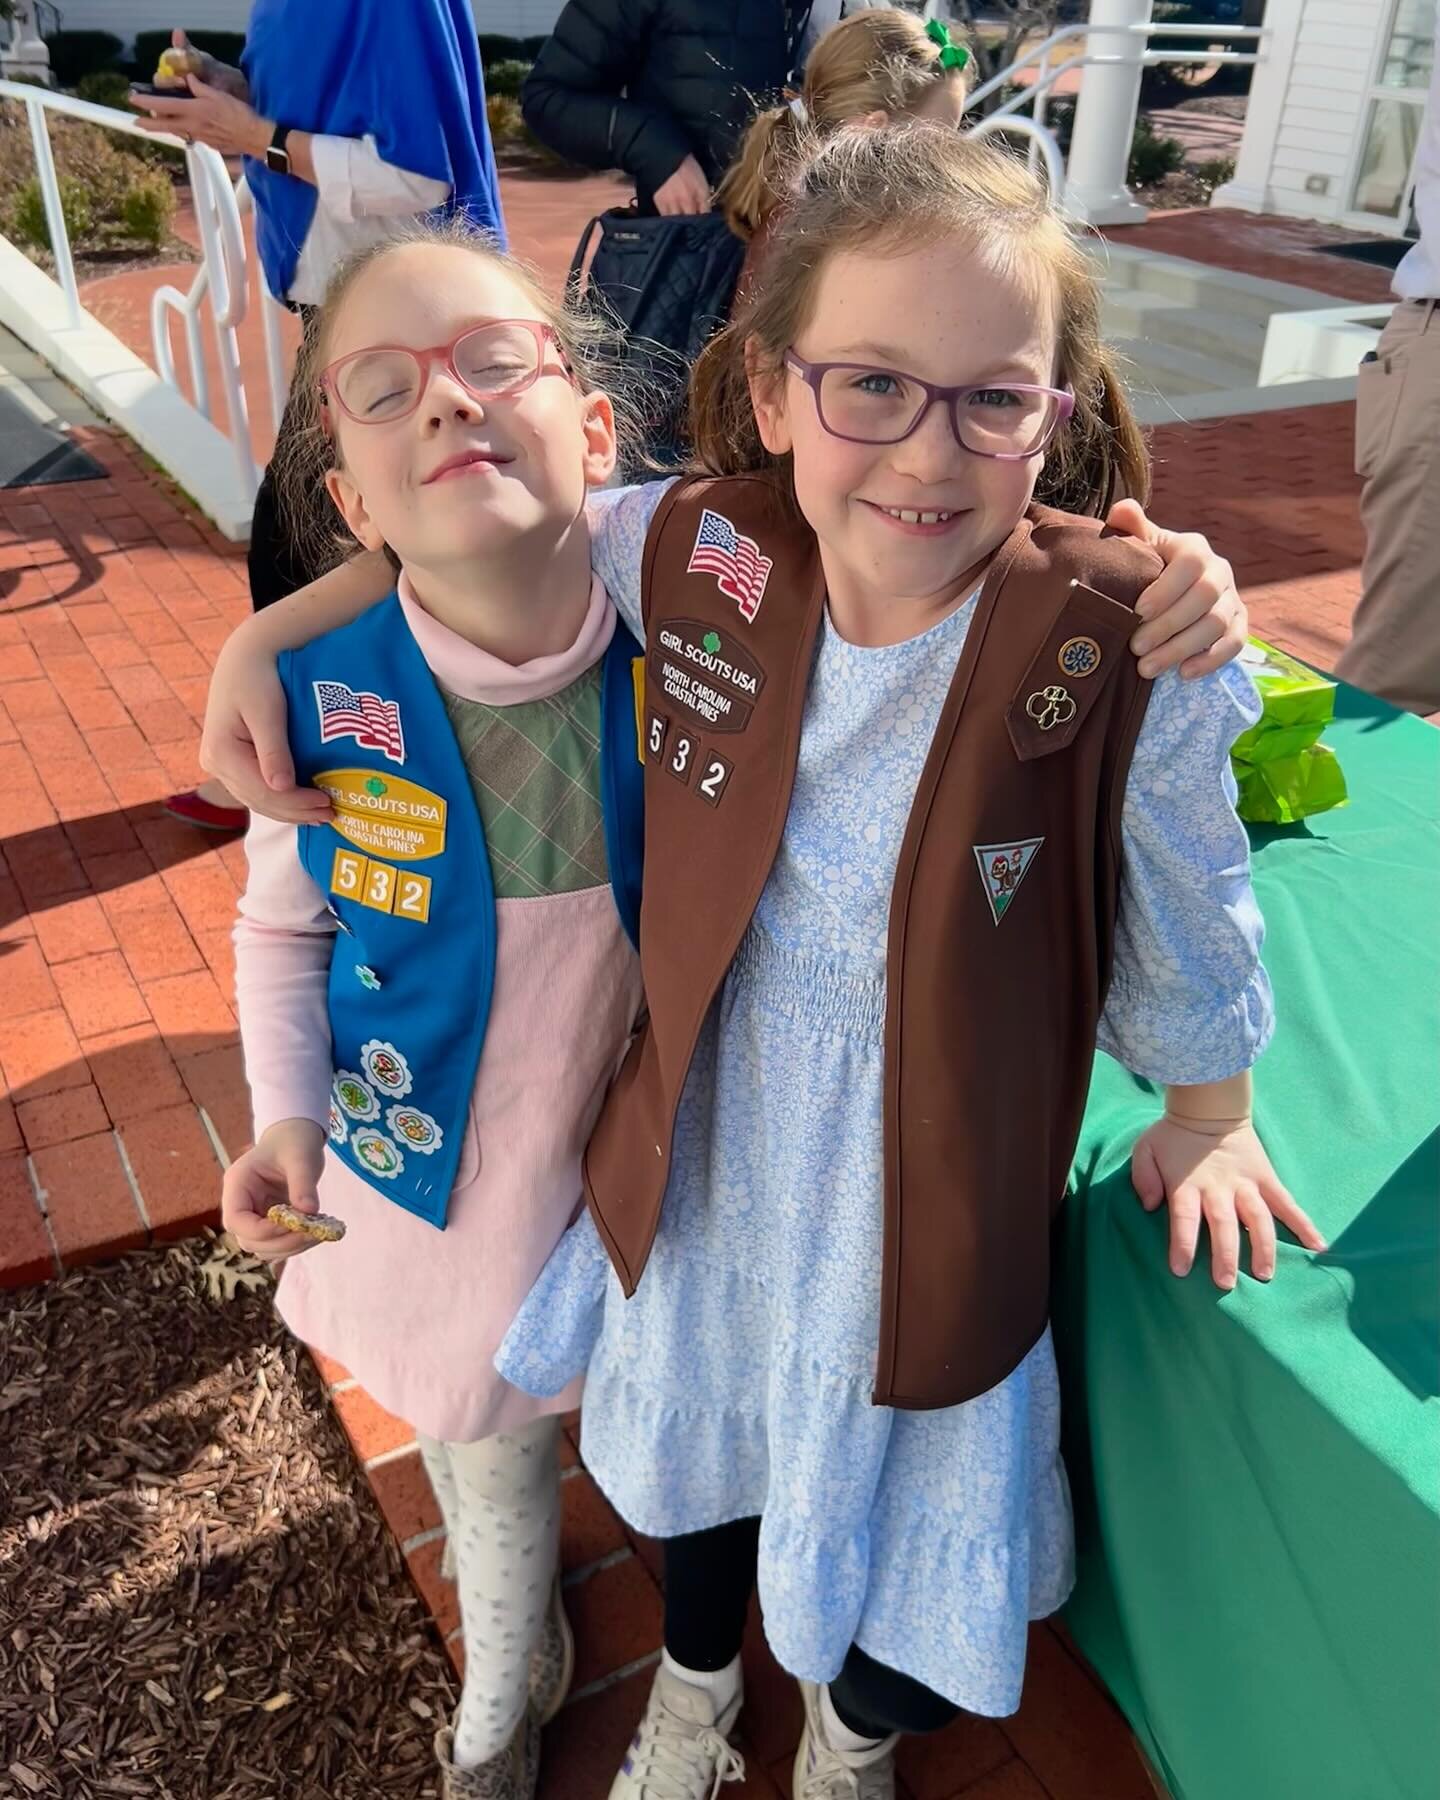 We had a wonderful Scout Sunday! Thank you to our Scouts and their leaders for serving our church family. And thank you to our church family for always supporting our young people. Did you get your cookies?? 🤤🍪